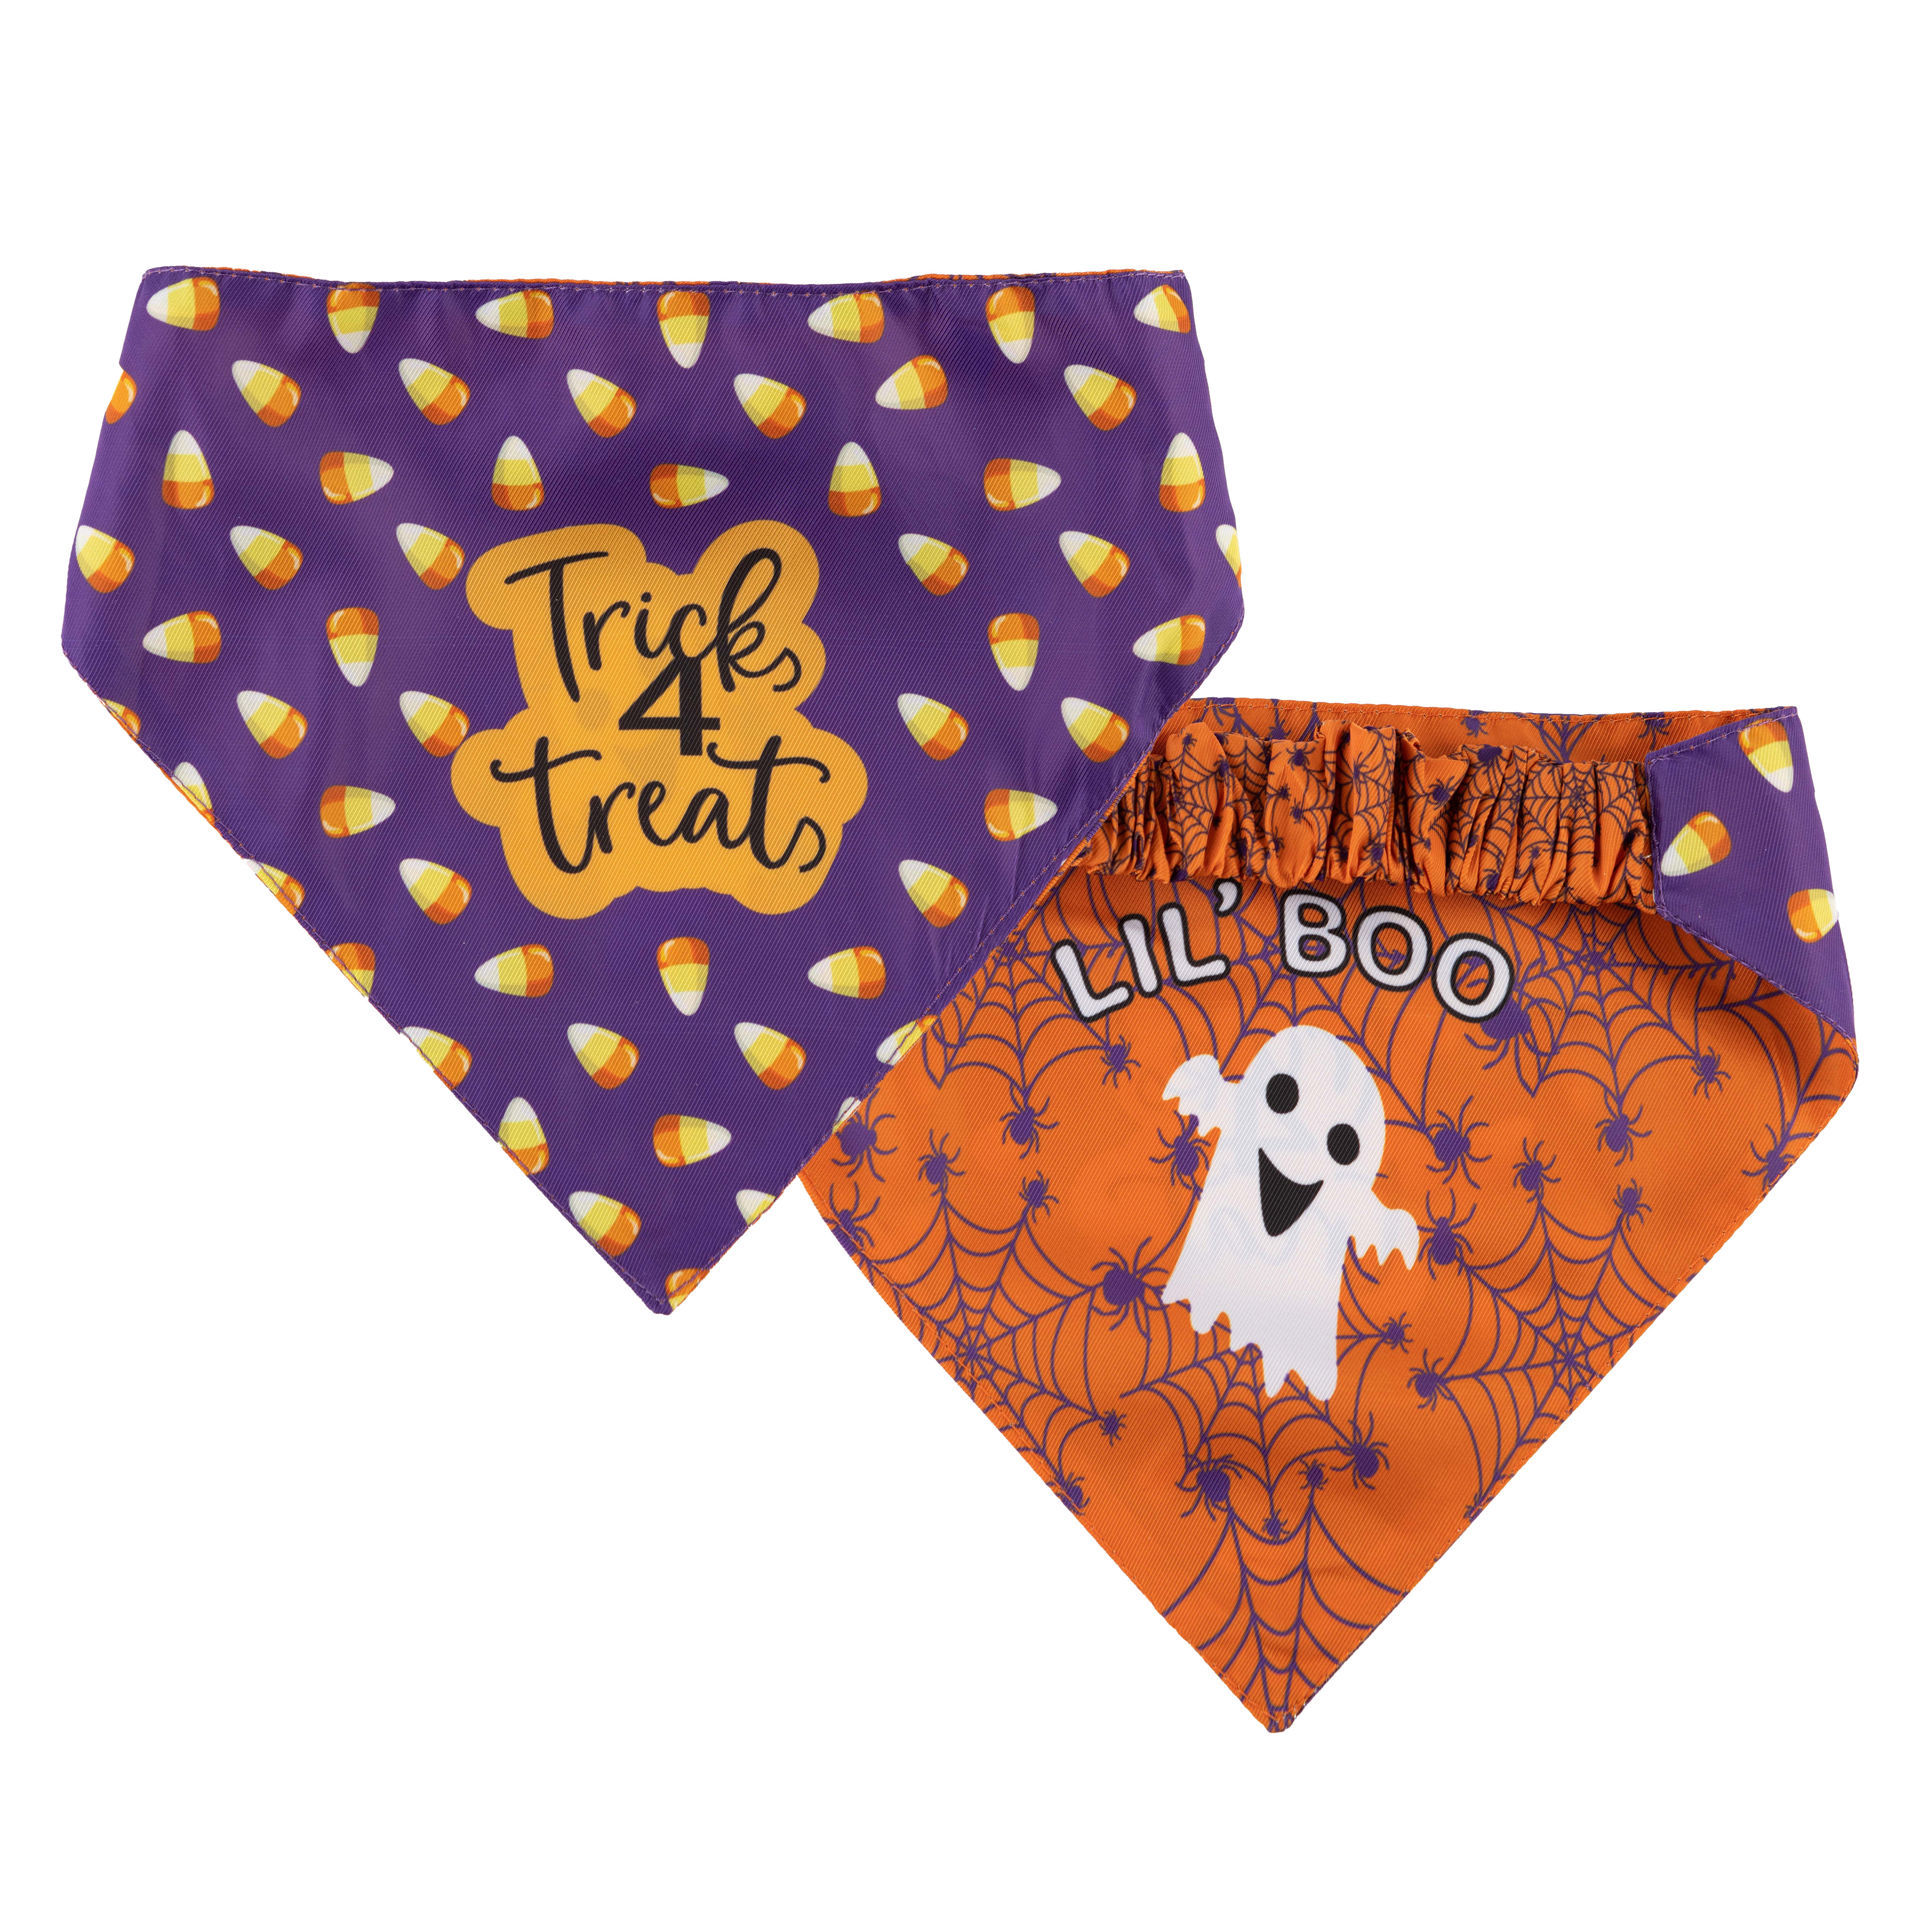 Picture of Two Sided Bandana - Trick or Treat